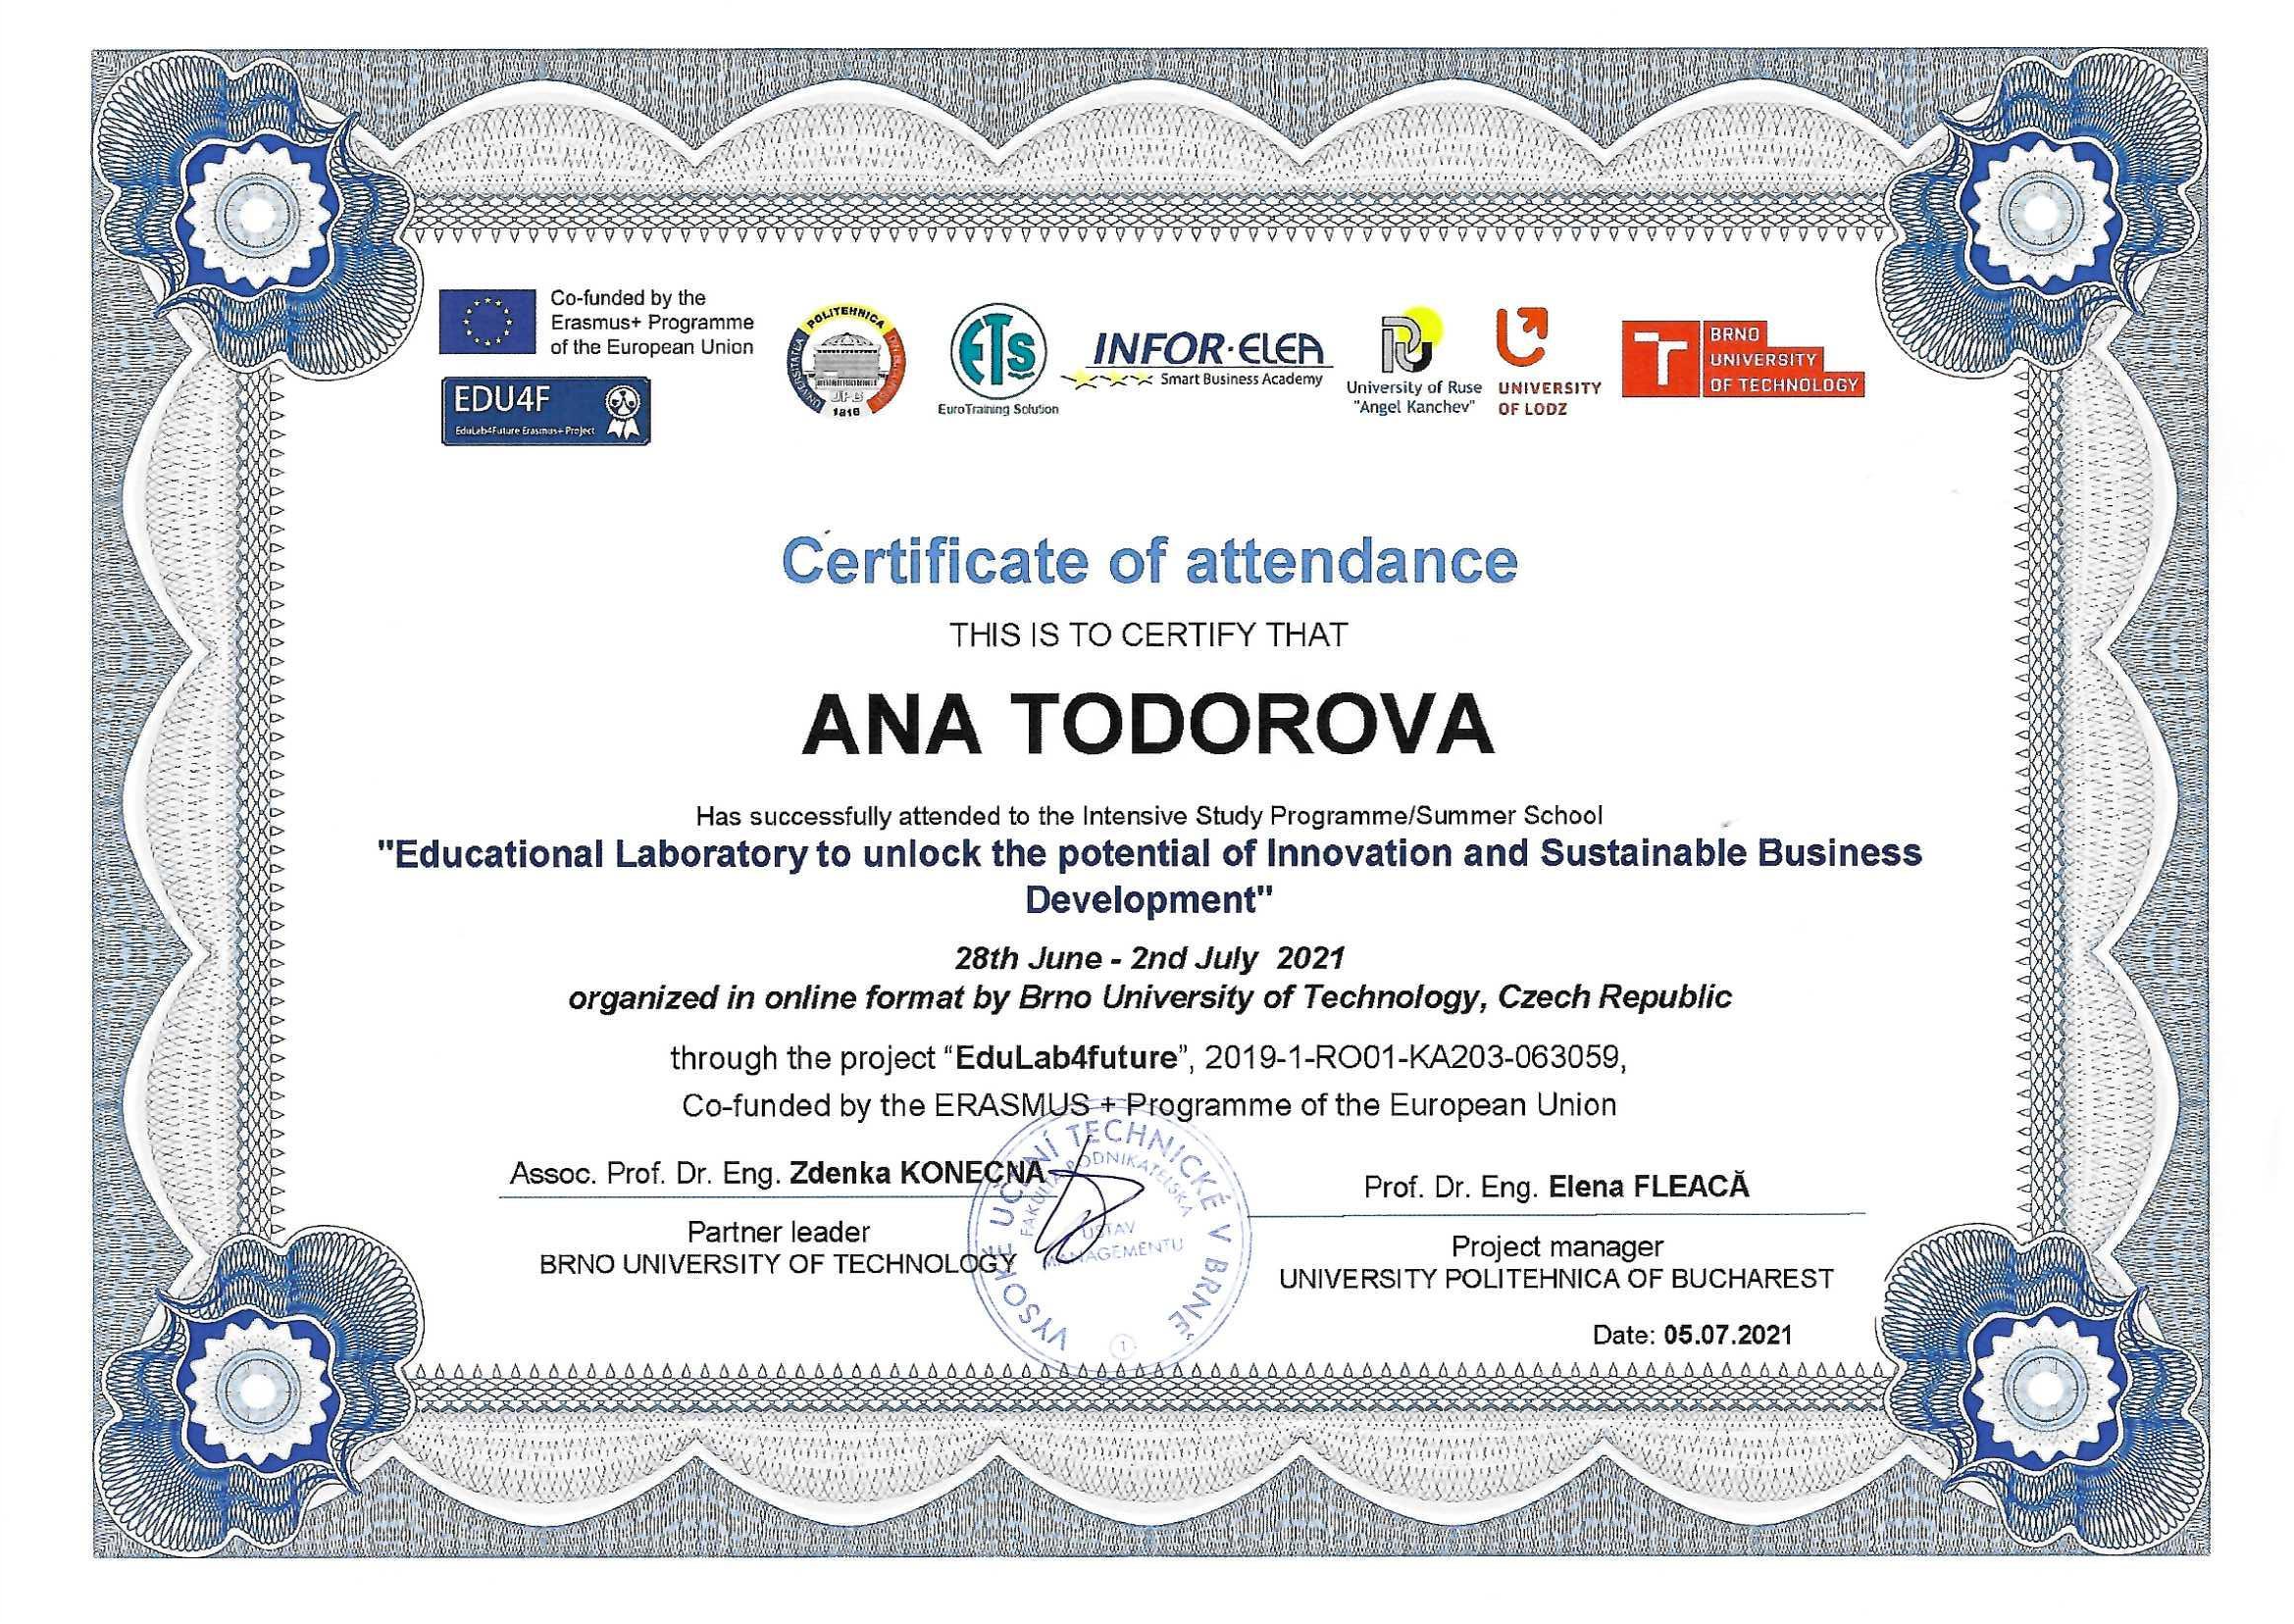 Educational Laboratory to unlock the potential of Innovation and Sustainable Business Development 2021 г.